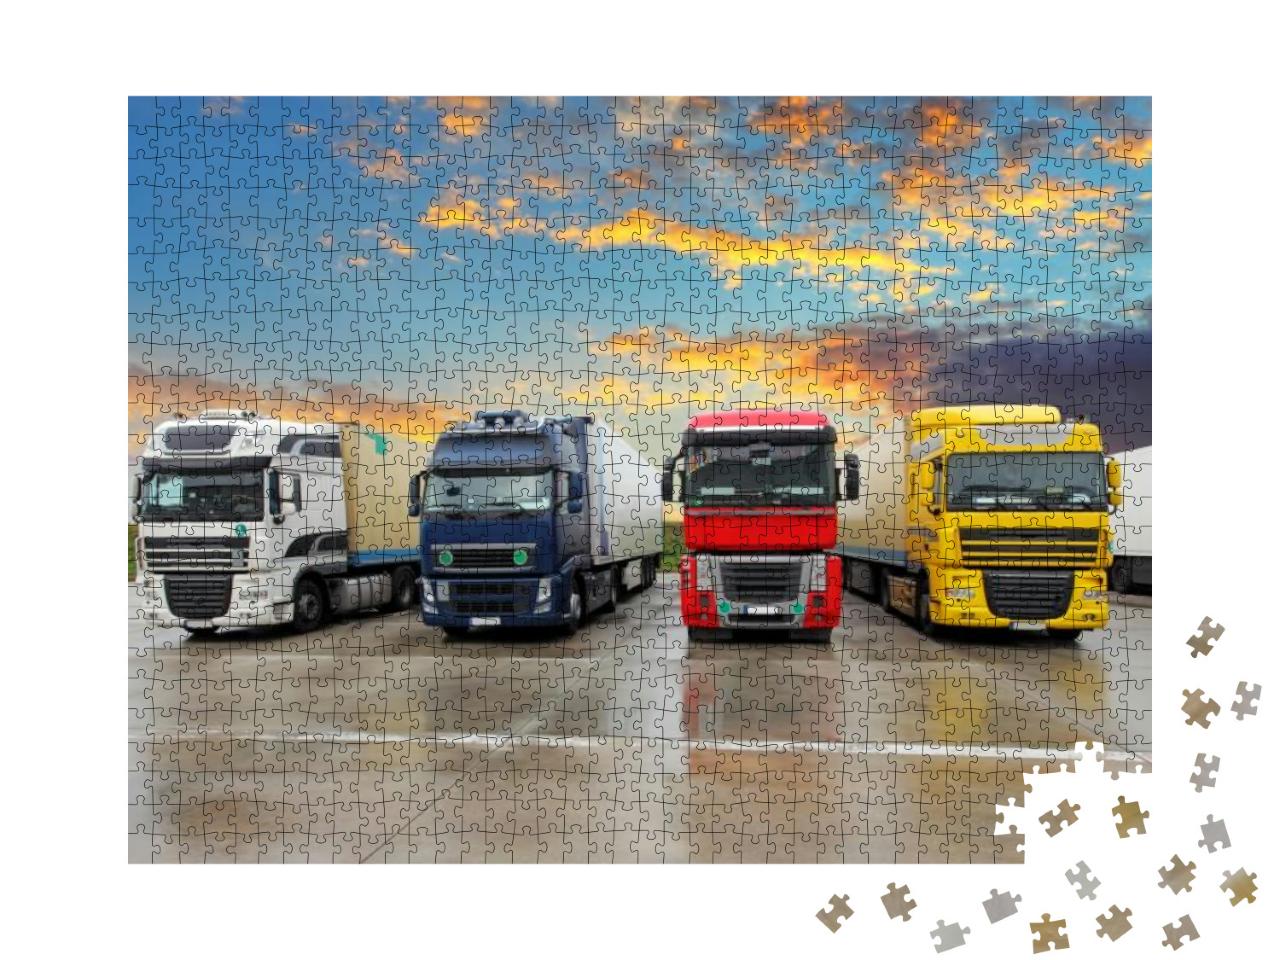 Truck - Freight Transportation... Jigsaw Puzzle with 1000 pieces